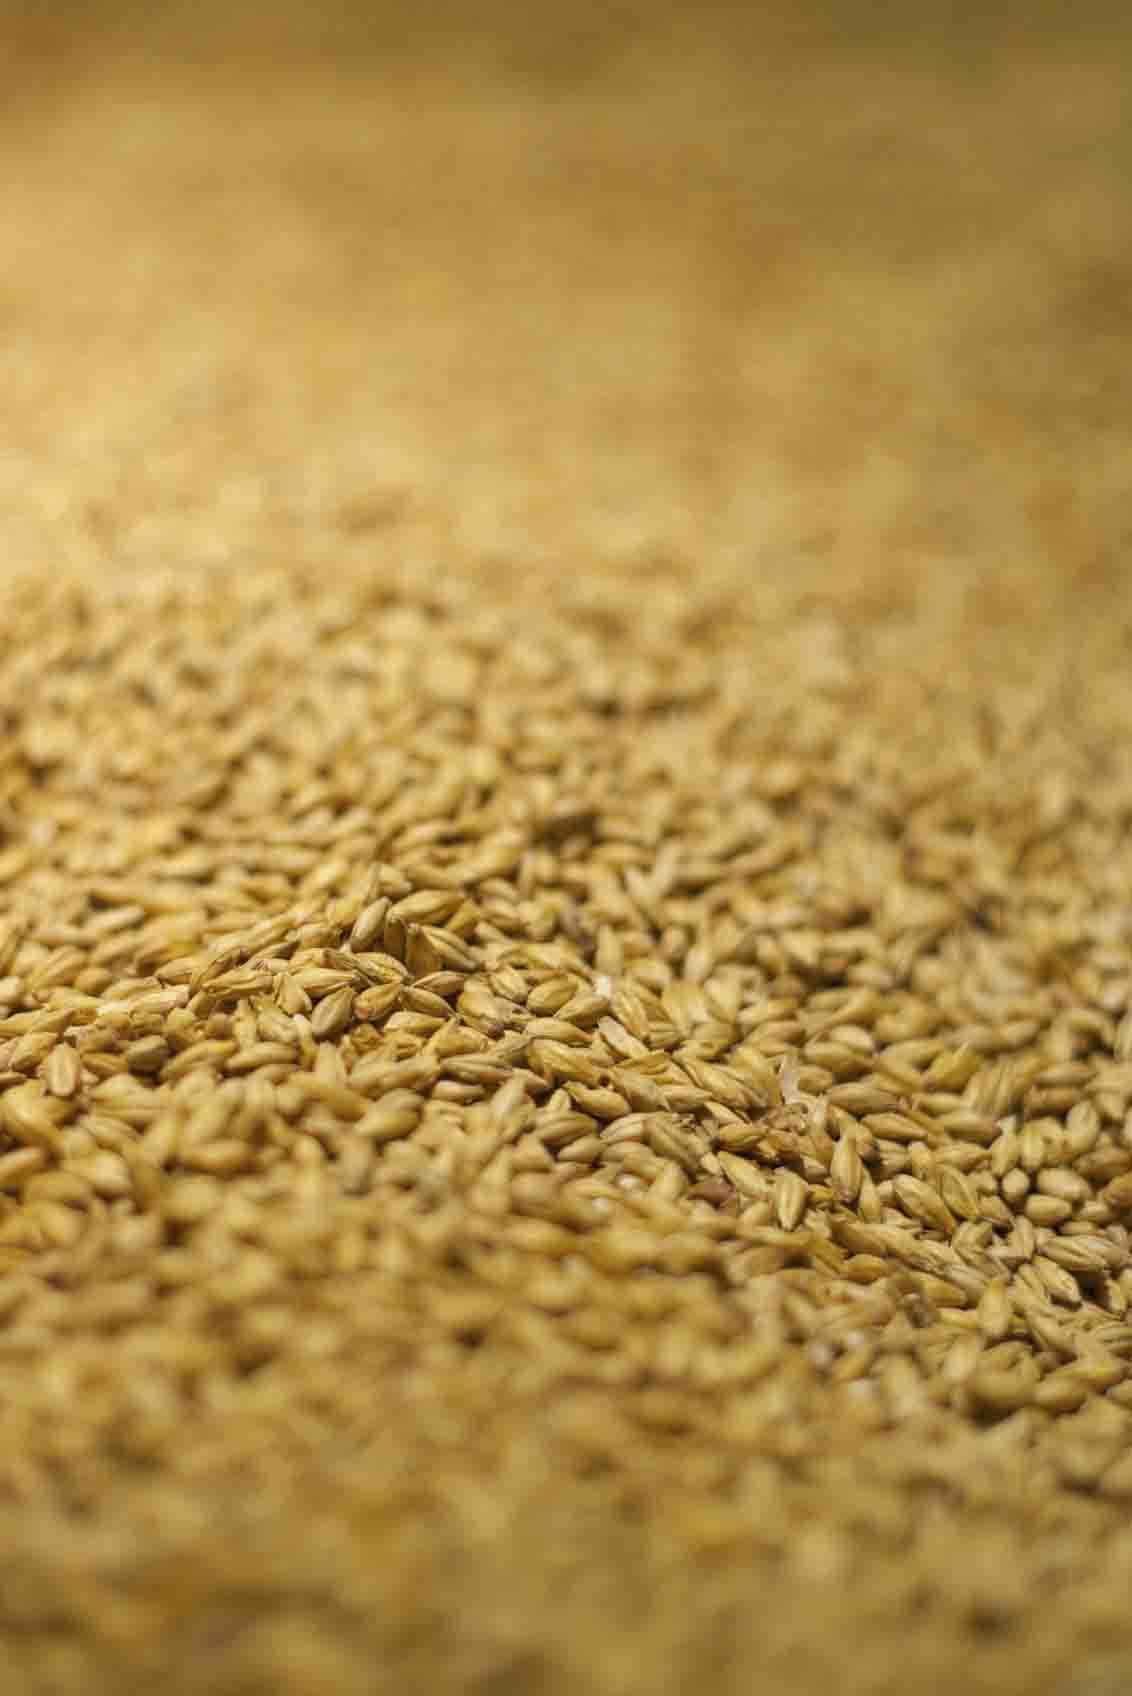 "Often malted barley might be produced in one jurisdiction and transported to another or beer might be produced in one jurisdiction and transported to another for bottling and canning."